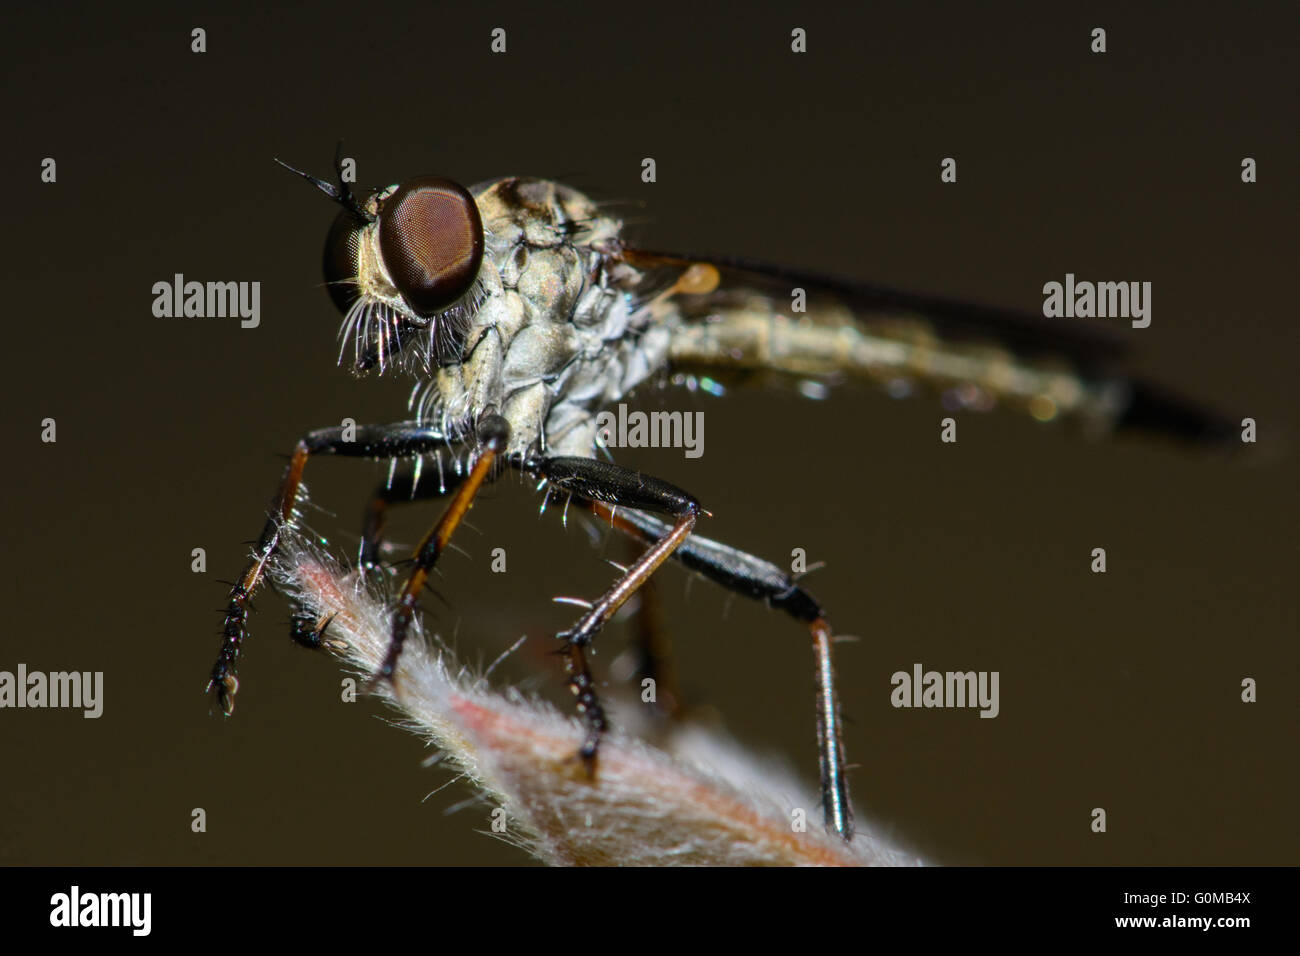 Robber Fly. Banque D'Images